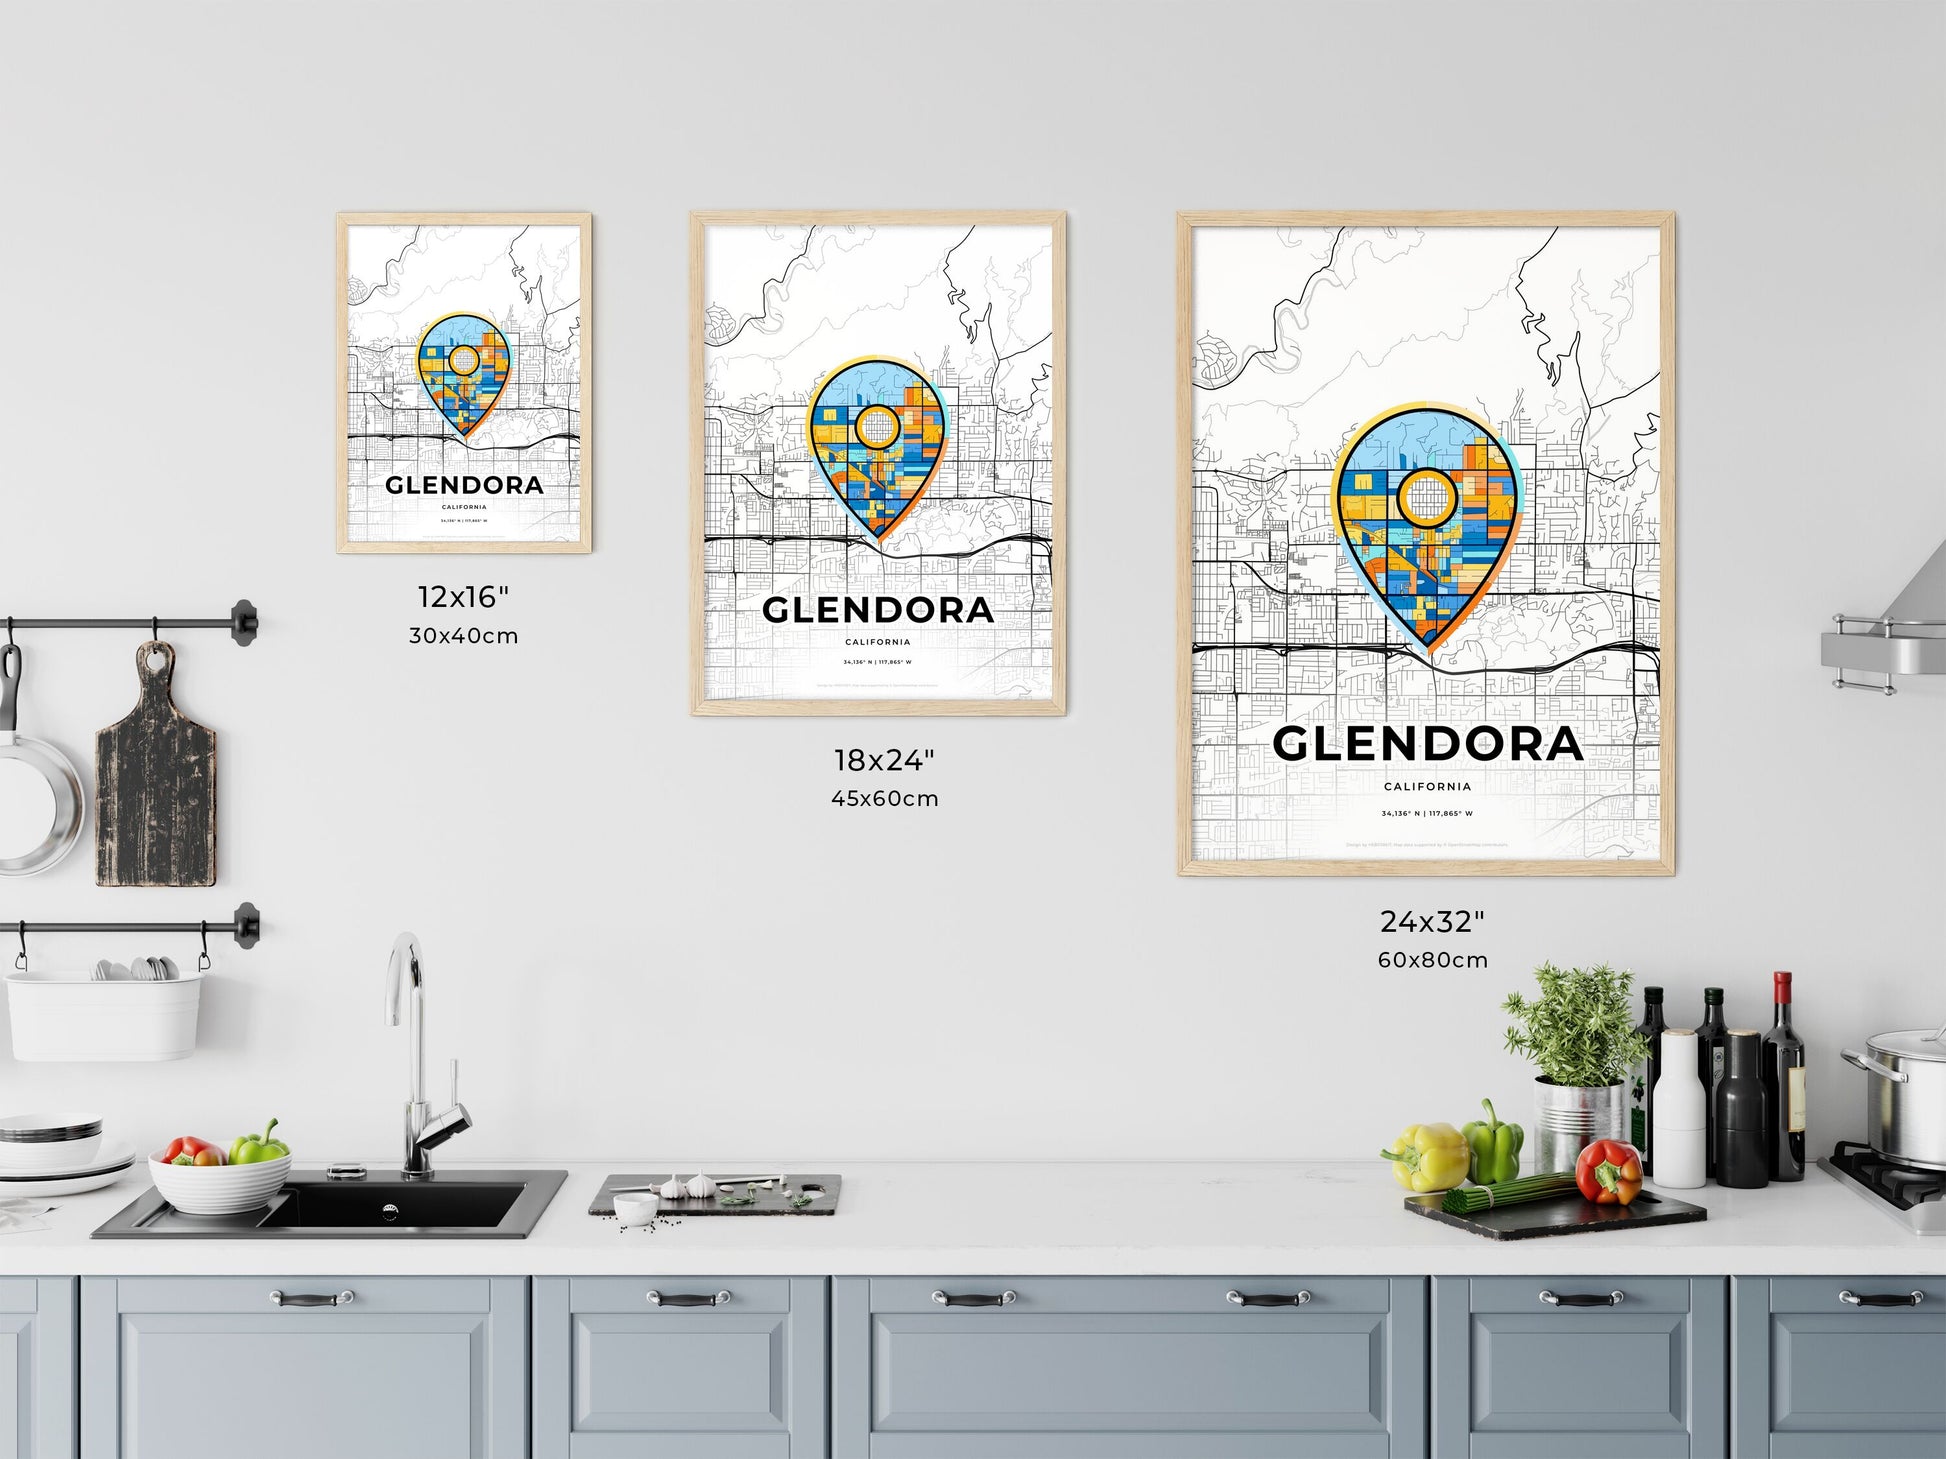 GLENDORA CALIFORNIA minimal art map with a colorful icon. Where it all began, Couple map gift.